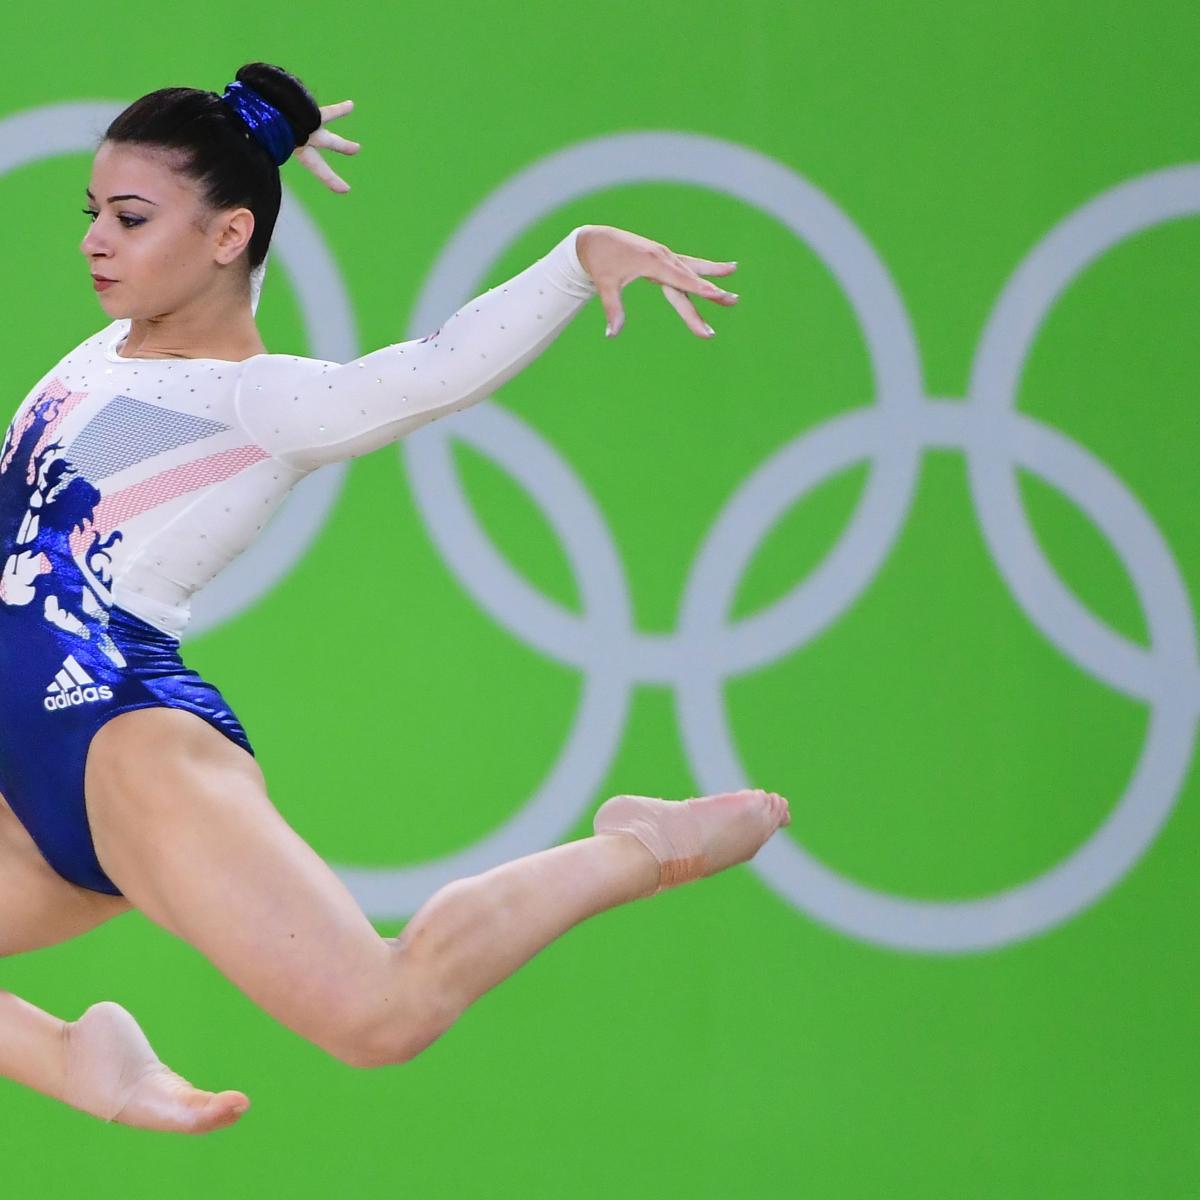 Señor dinero Aprovechar Is Gymnastics Among the Most Undervalued Team GB Sports at the Olympics? |  News, Scores, Highlights, Stats, and Rumors | Bleacher Report